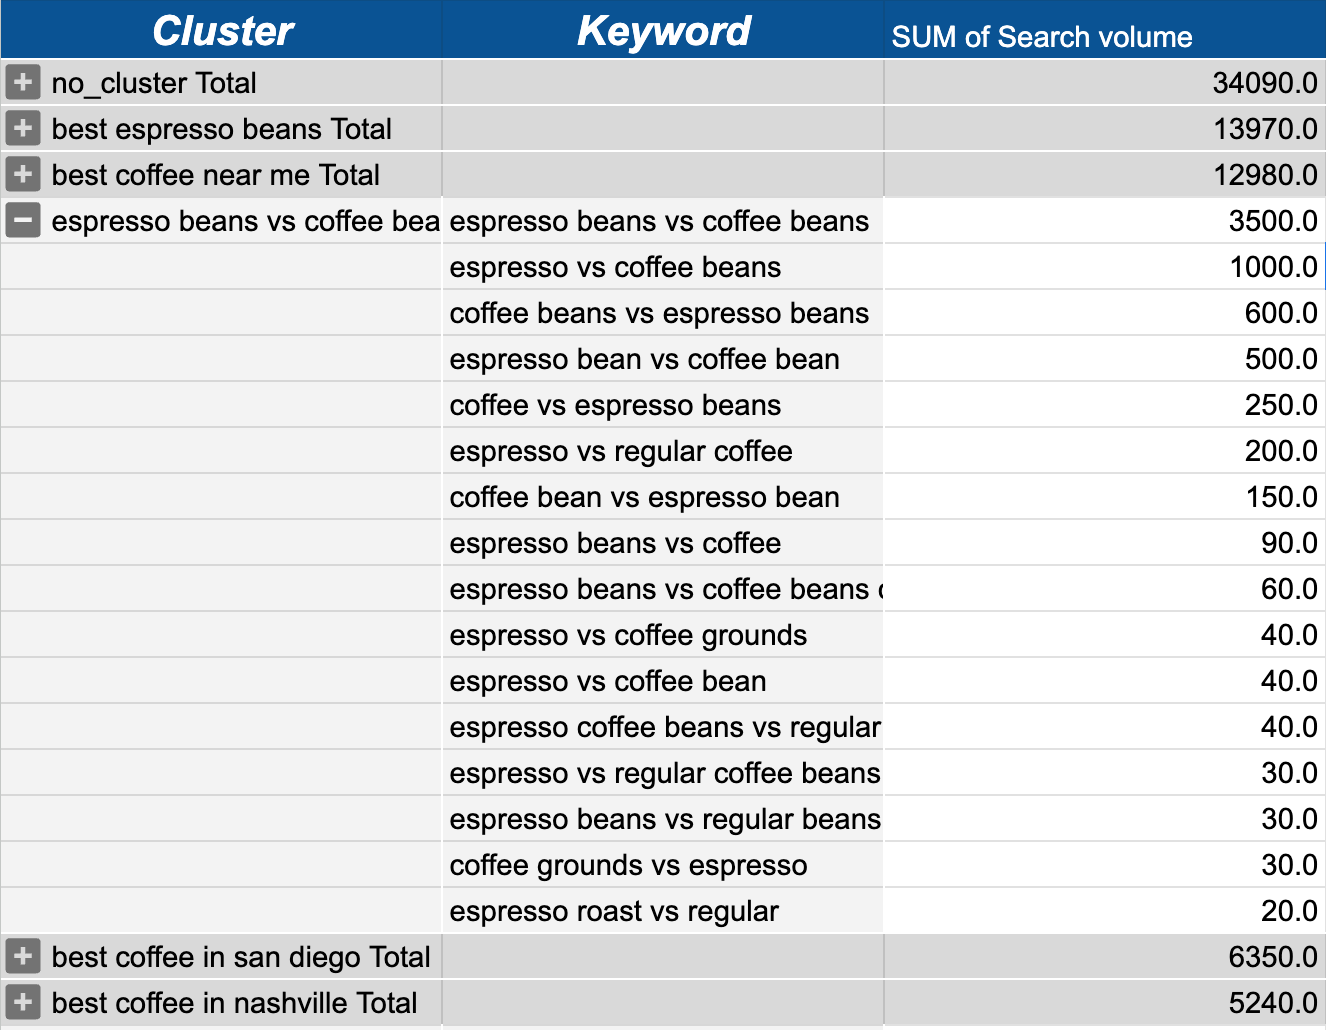 Result of clustering with Keyword Insights
